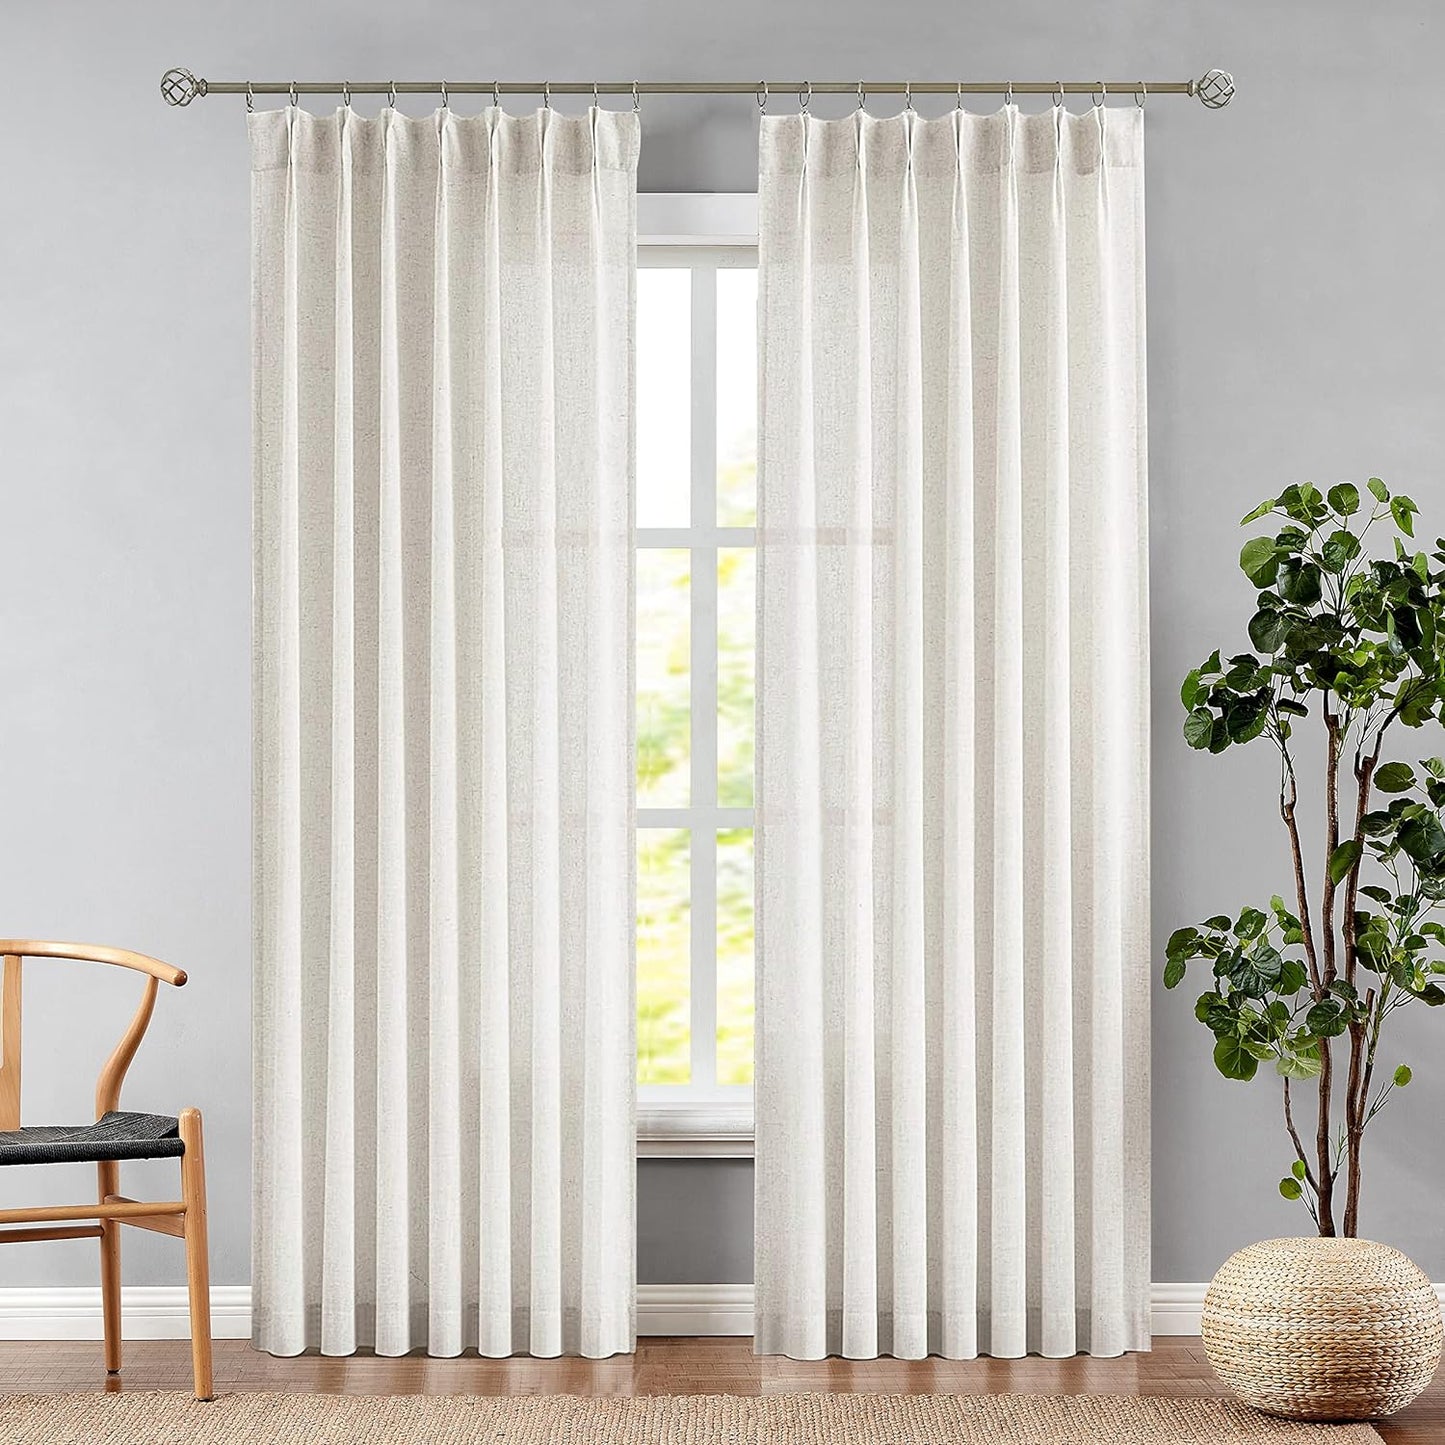 Central Park White Pinch Pleat Sheer Curtain 108 Inches Extra Long Textured Farmhouse Window Treatment Drapery Sets for Living Room Bedroom, 40"X108"X2  Central Park Linen/Pinch 40"X84"X2 